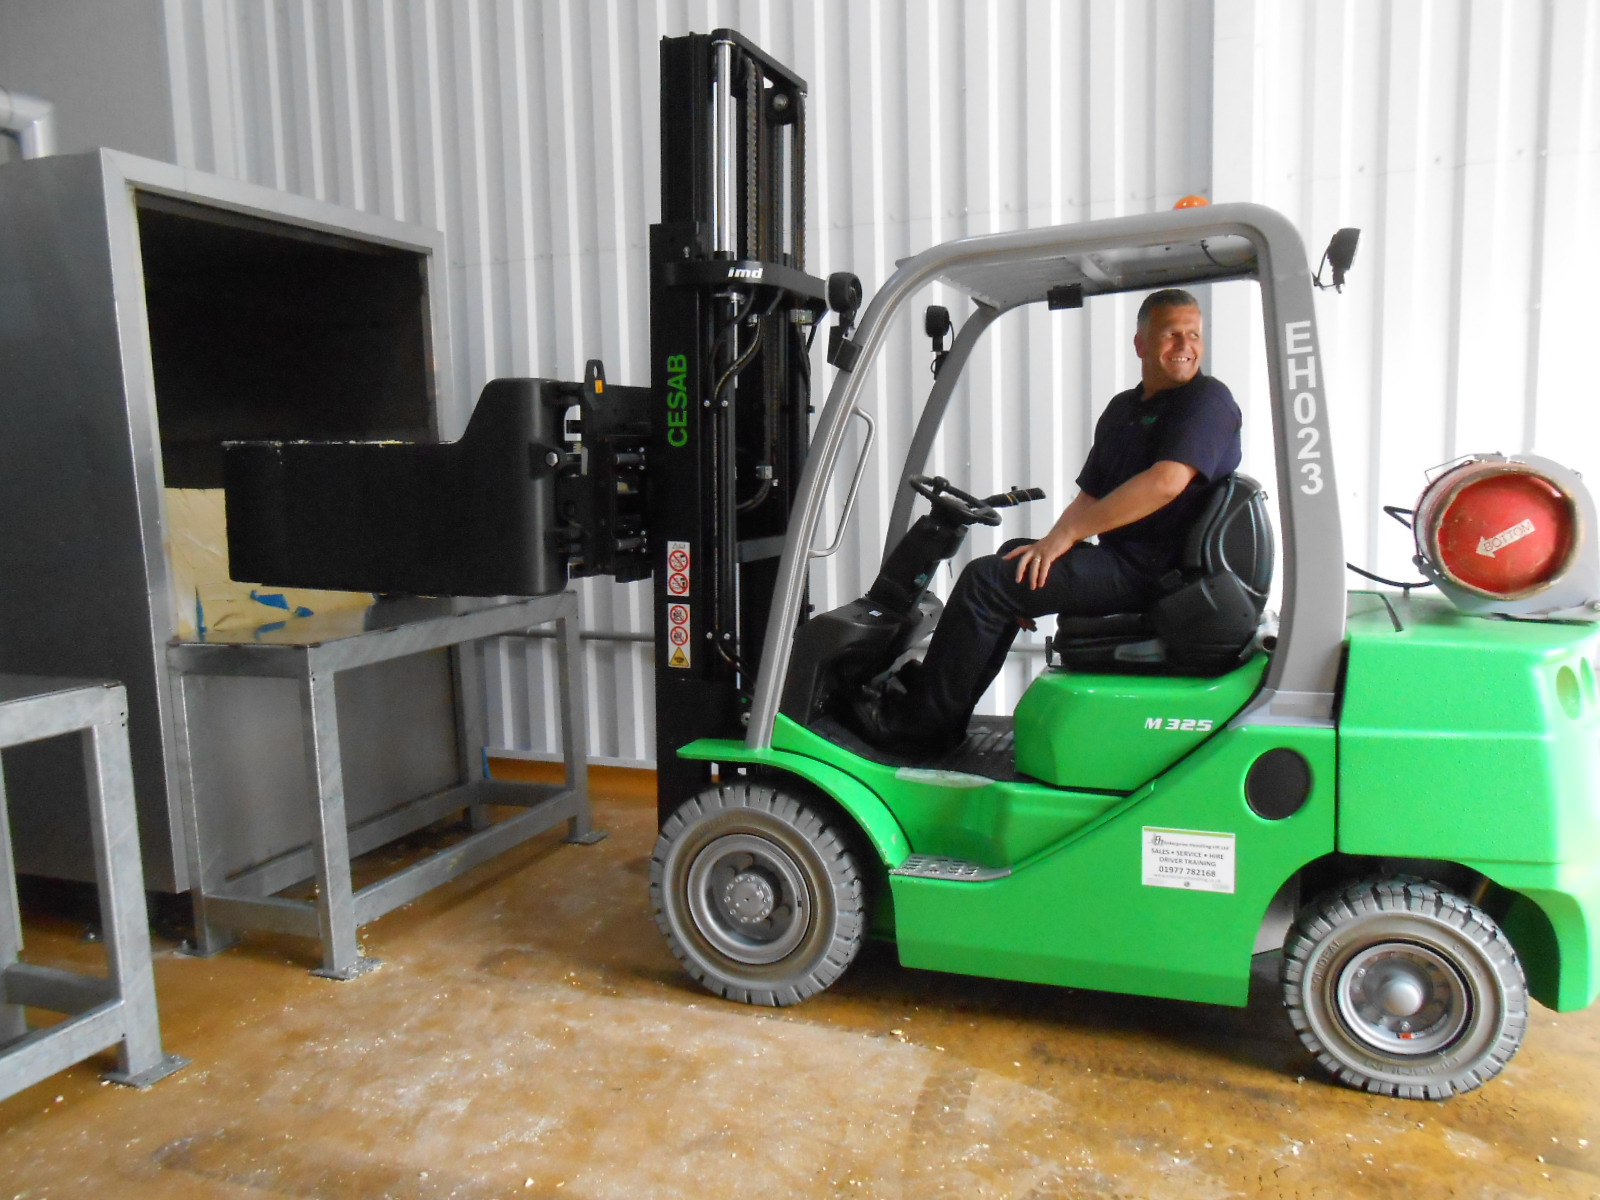 B&B Attachments helps improve productivity at Olam Foods